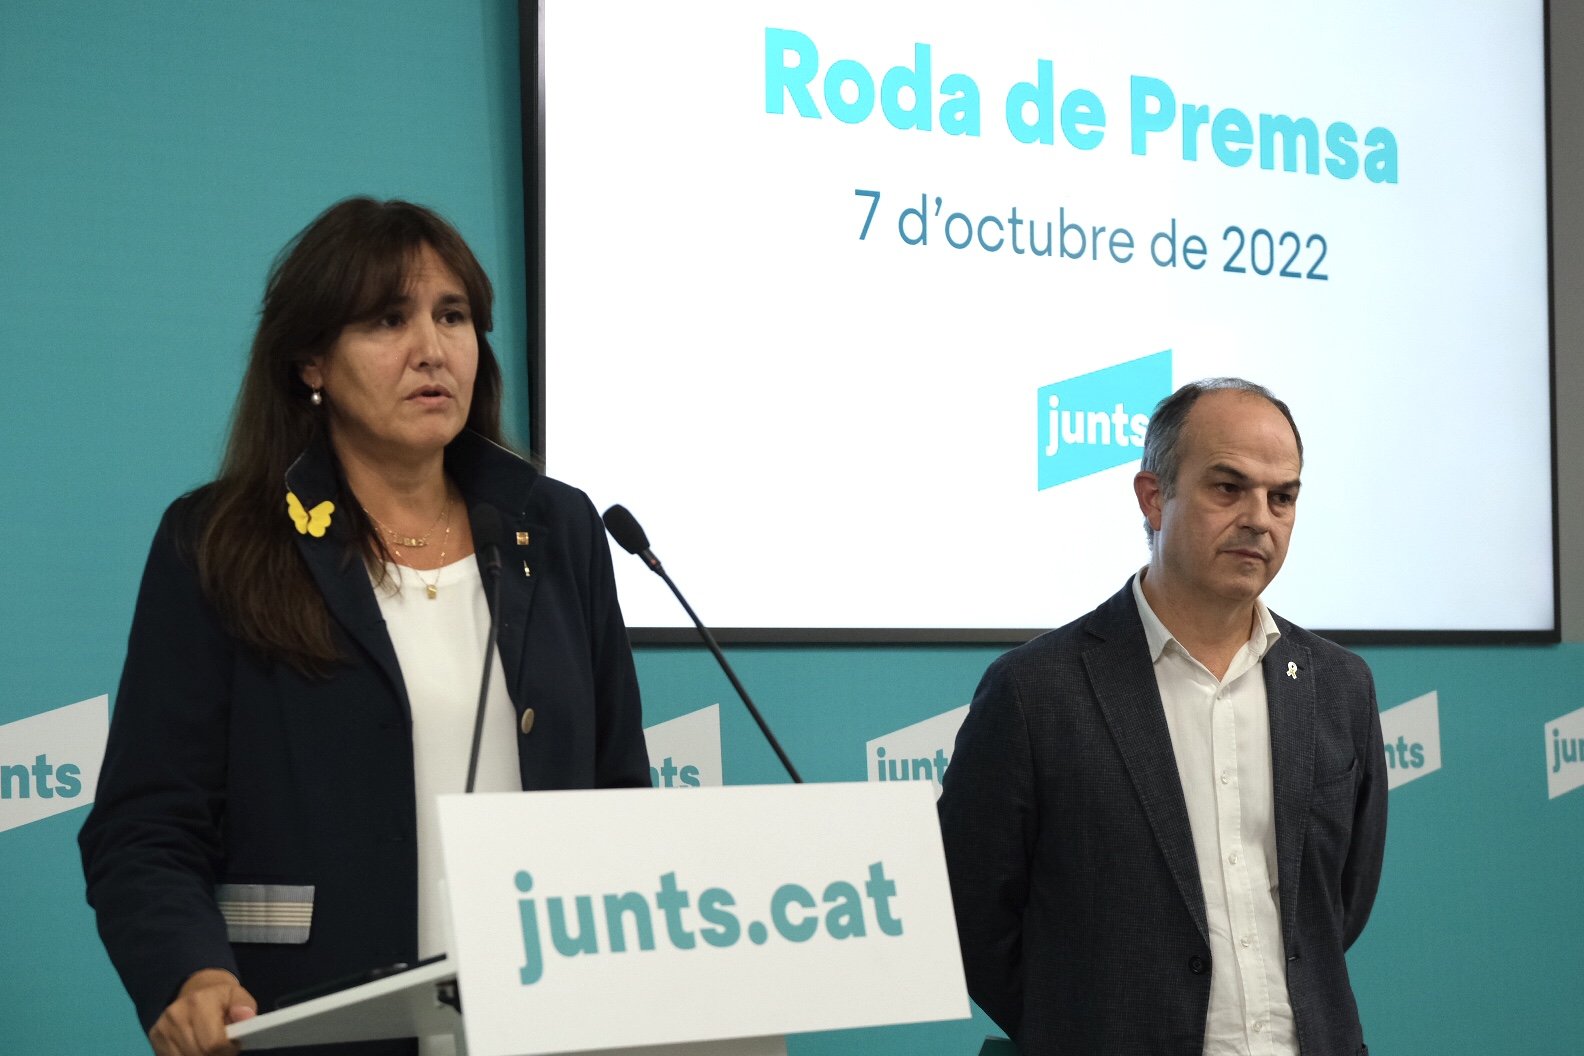 Junts closes ranks and won't call for suspension of ERC deputies Jové and Salvadó